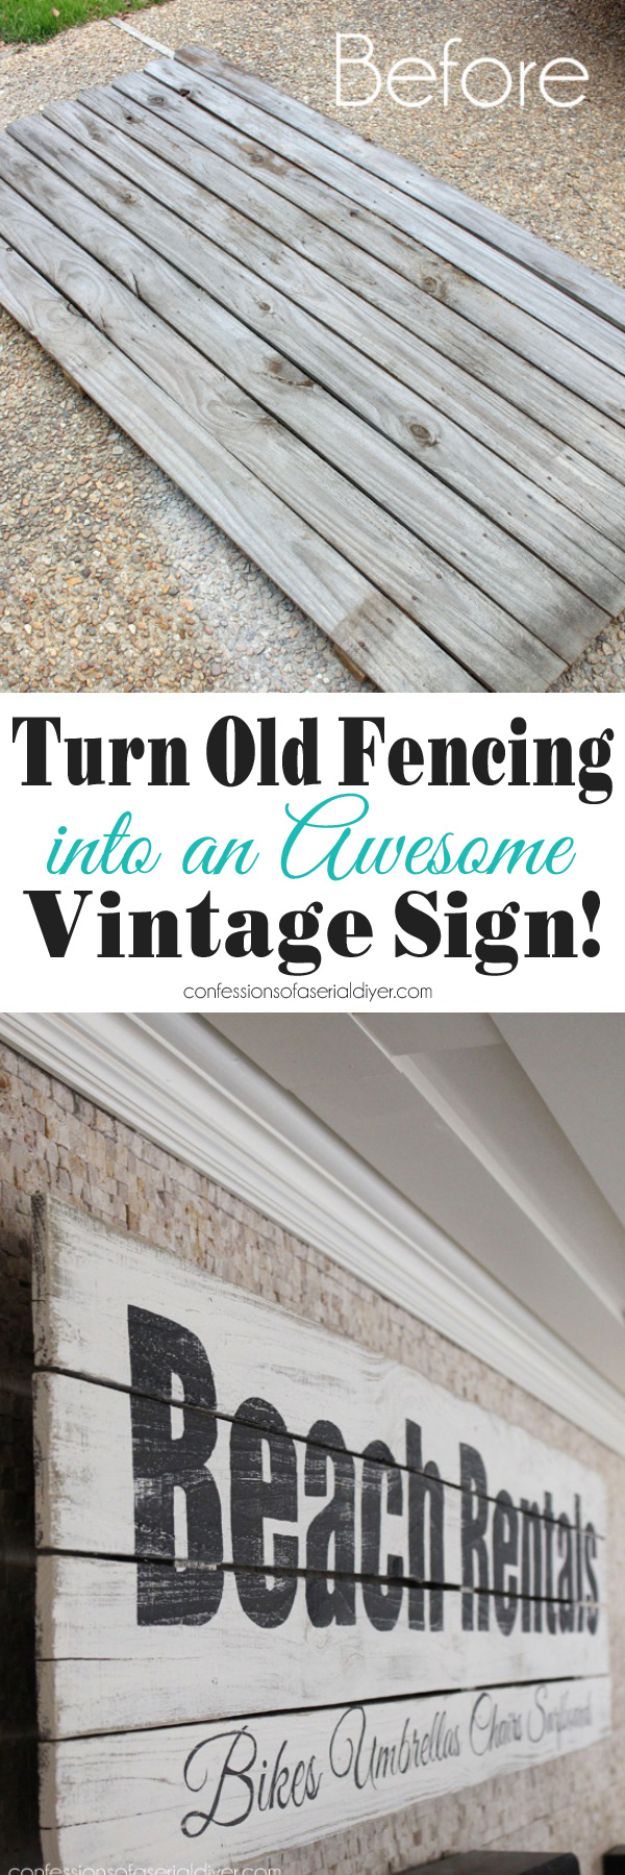 DIY Vintage Signs - Turn An Old Fence into A Vintage Sign - Rustic, Vintage Sign Projects to Make At Home - Creative Home Decor on a Budget and Cheap Crafts for Living Room, Bedroom and Kitchen - Paint Letters, Transfer to Wood, Aged Finishes and Fun Word Stencils and Easy Ideas for Farmhouse Wall Art http://diyjoy.com/diy-vintage-signs